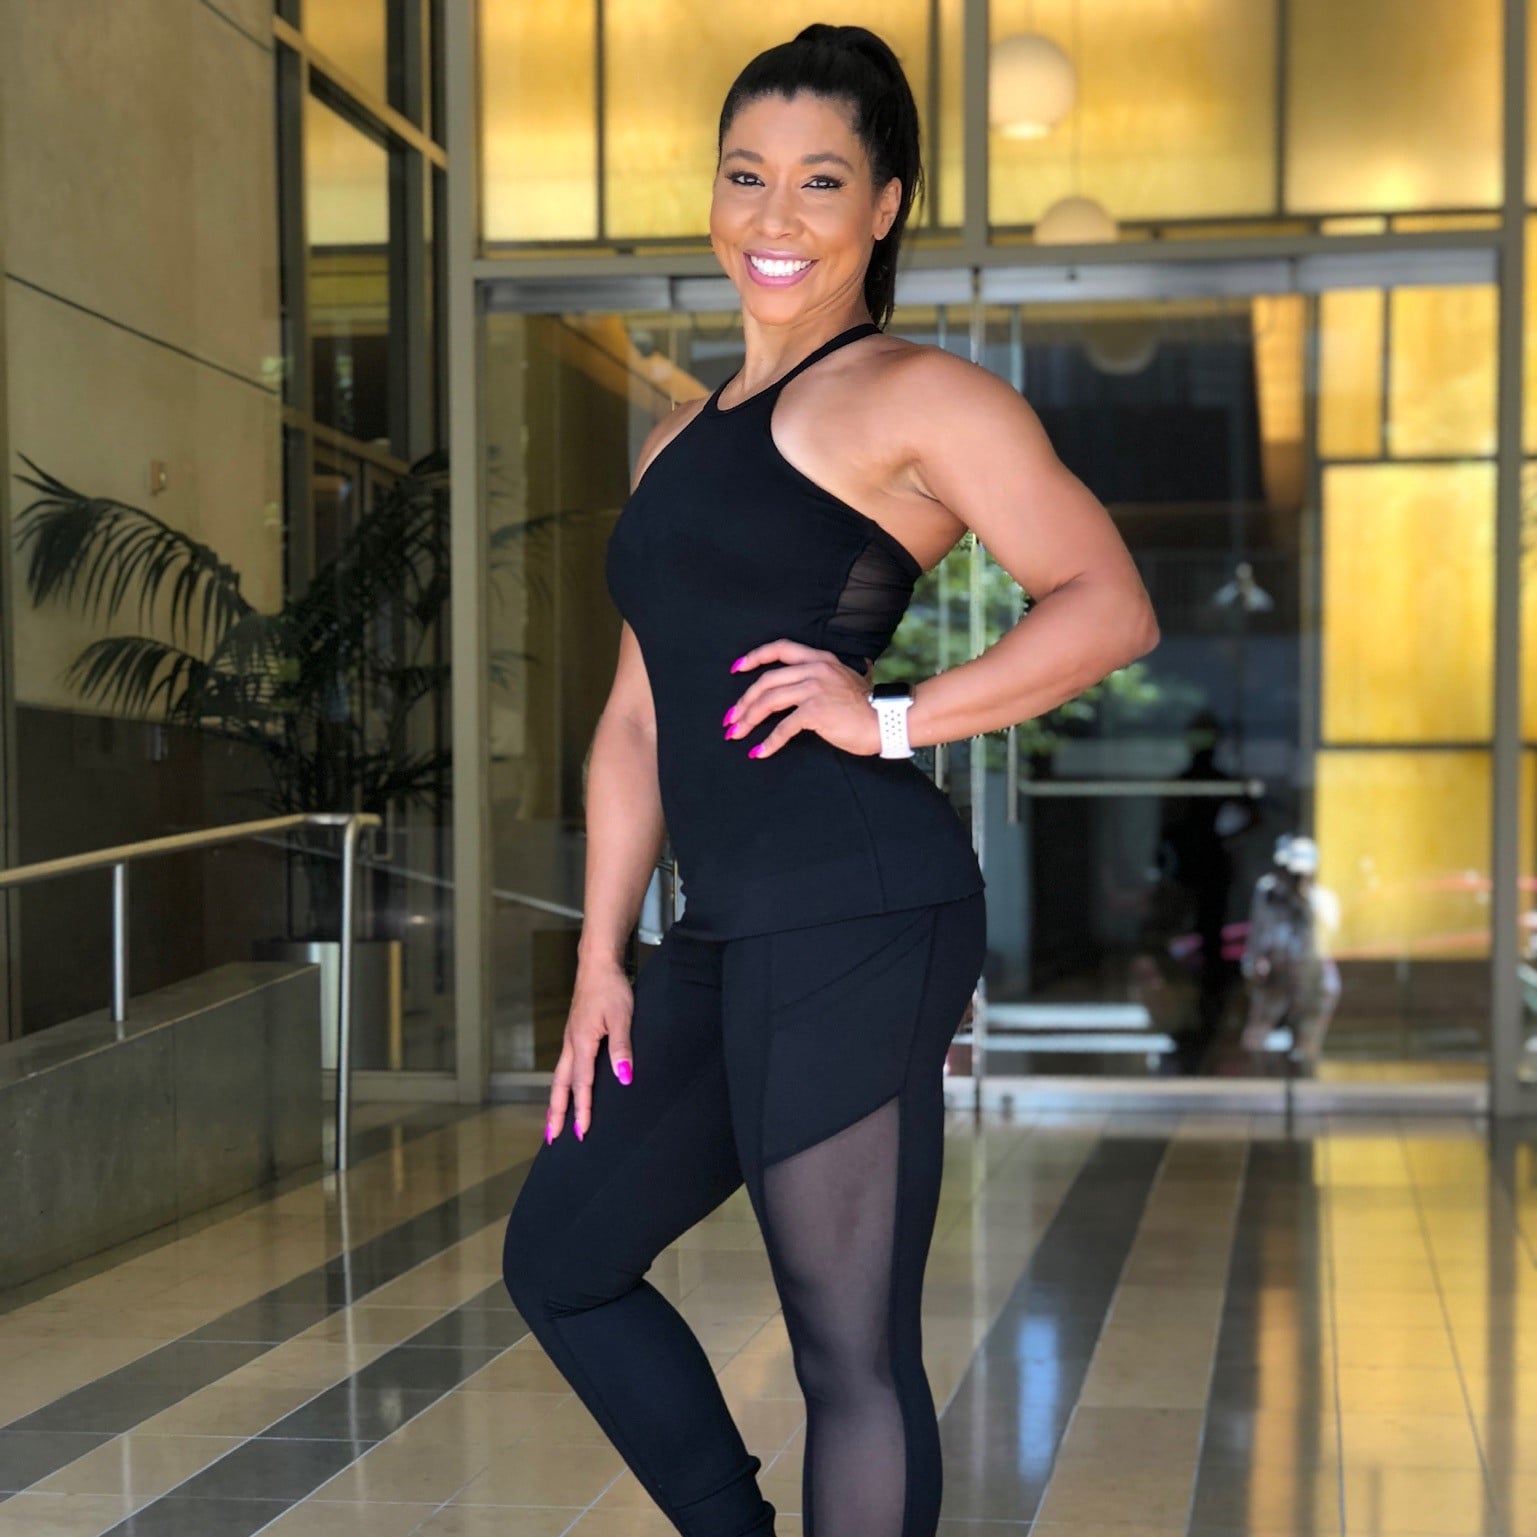 19 Fitness Experts To Follow On Instagram (2021) Jeanette Jenkins